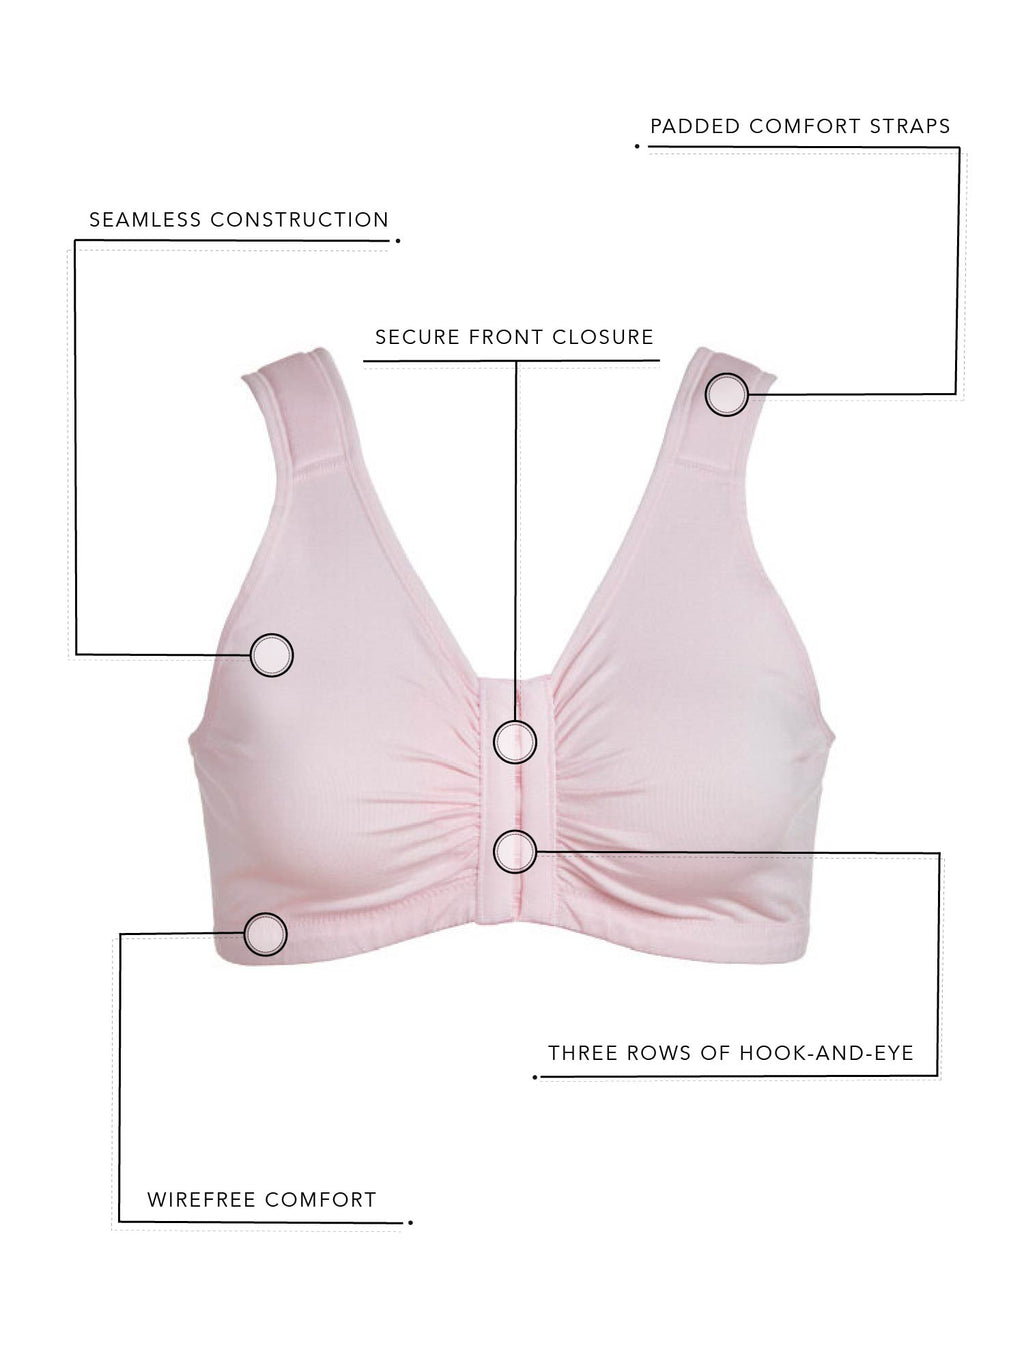 LOVECOCO Ladies Comfort Bra Hook and Eye Front Closure Wireless Cotton  Bralette 